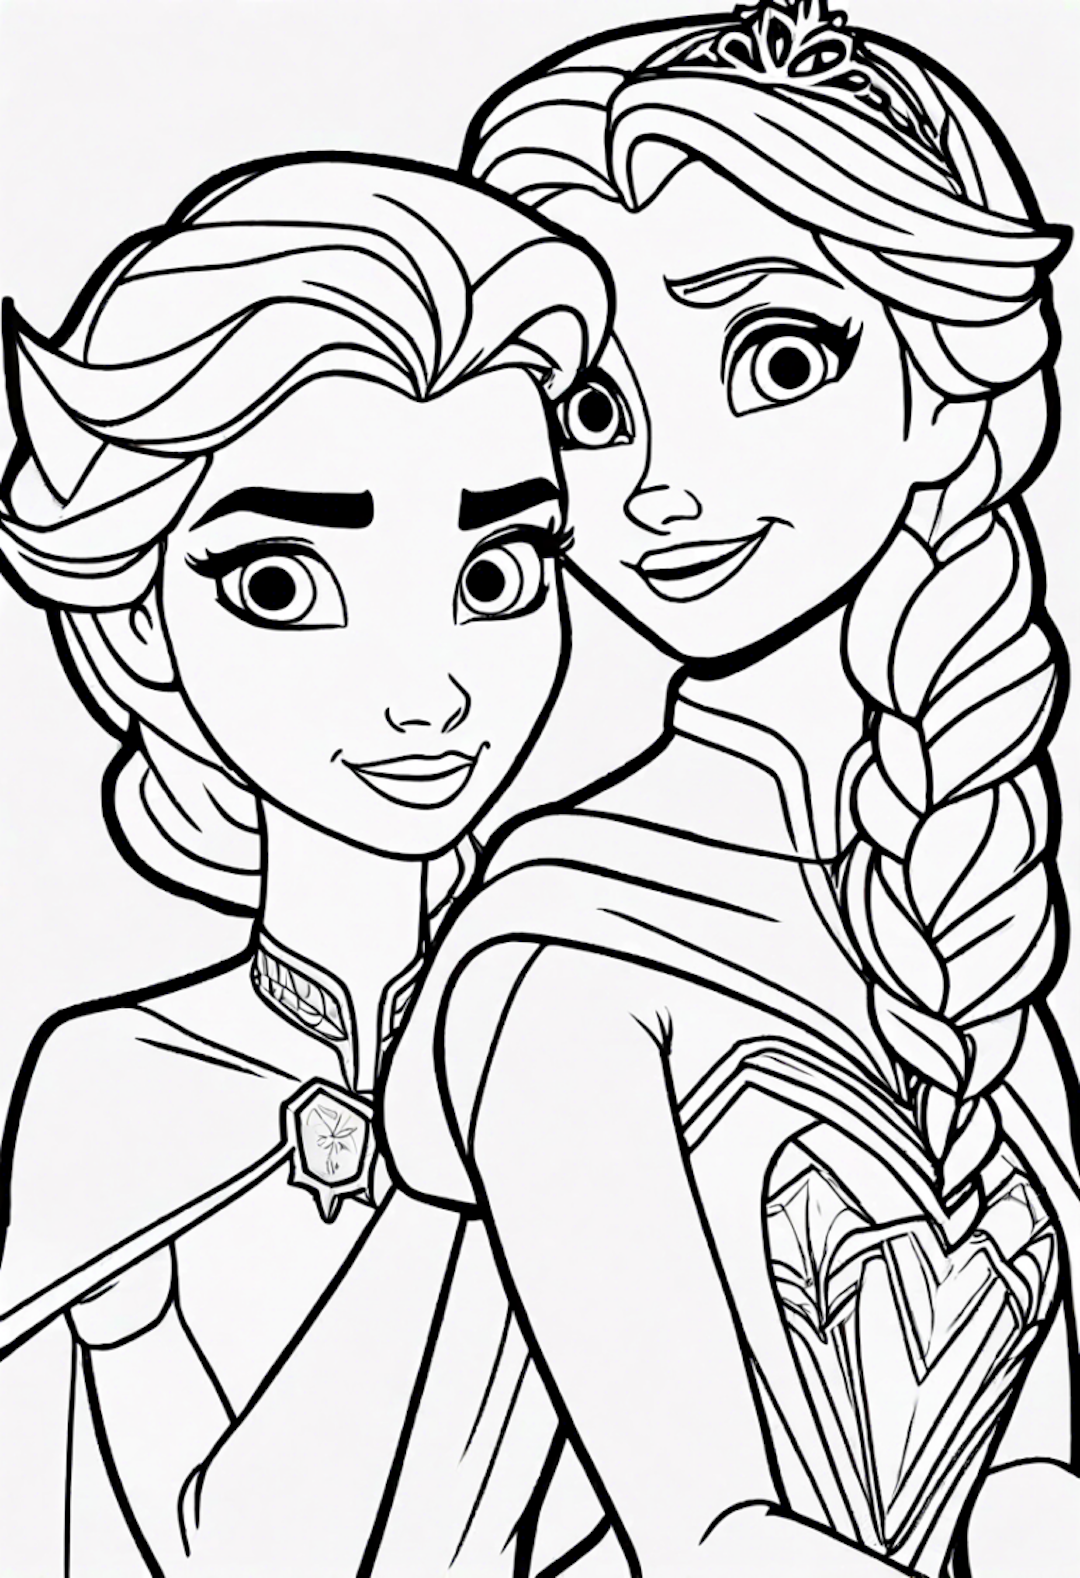 Elsa and Anna’s Magical Sister Bond coloring pages